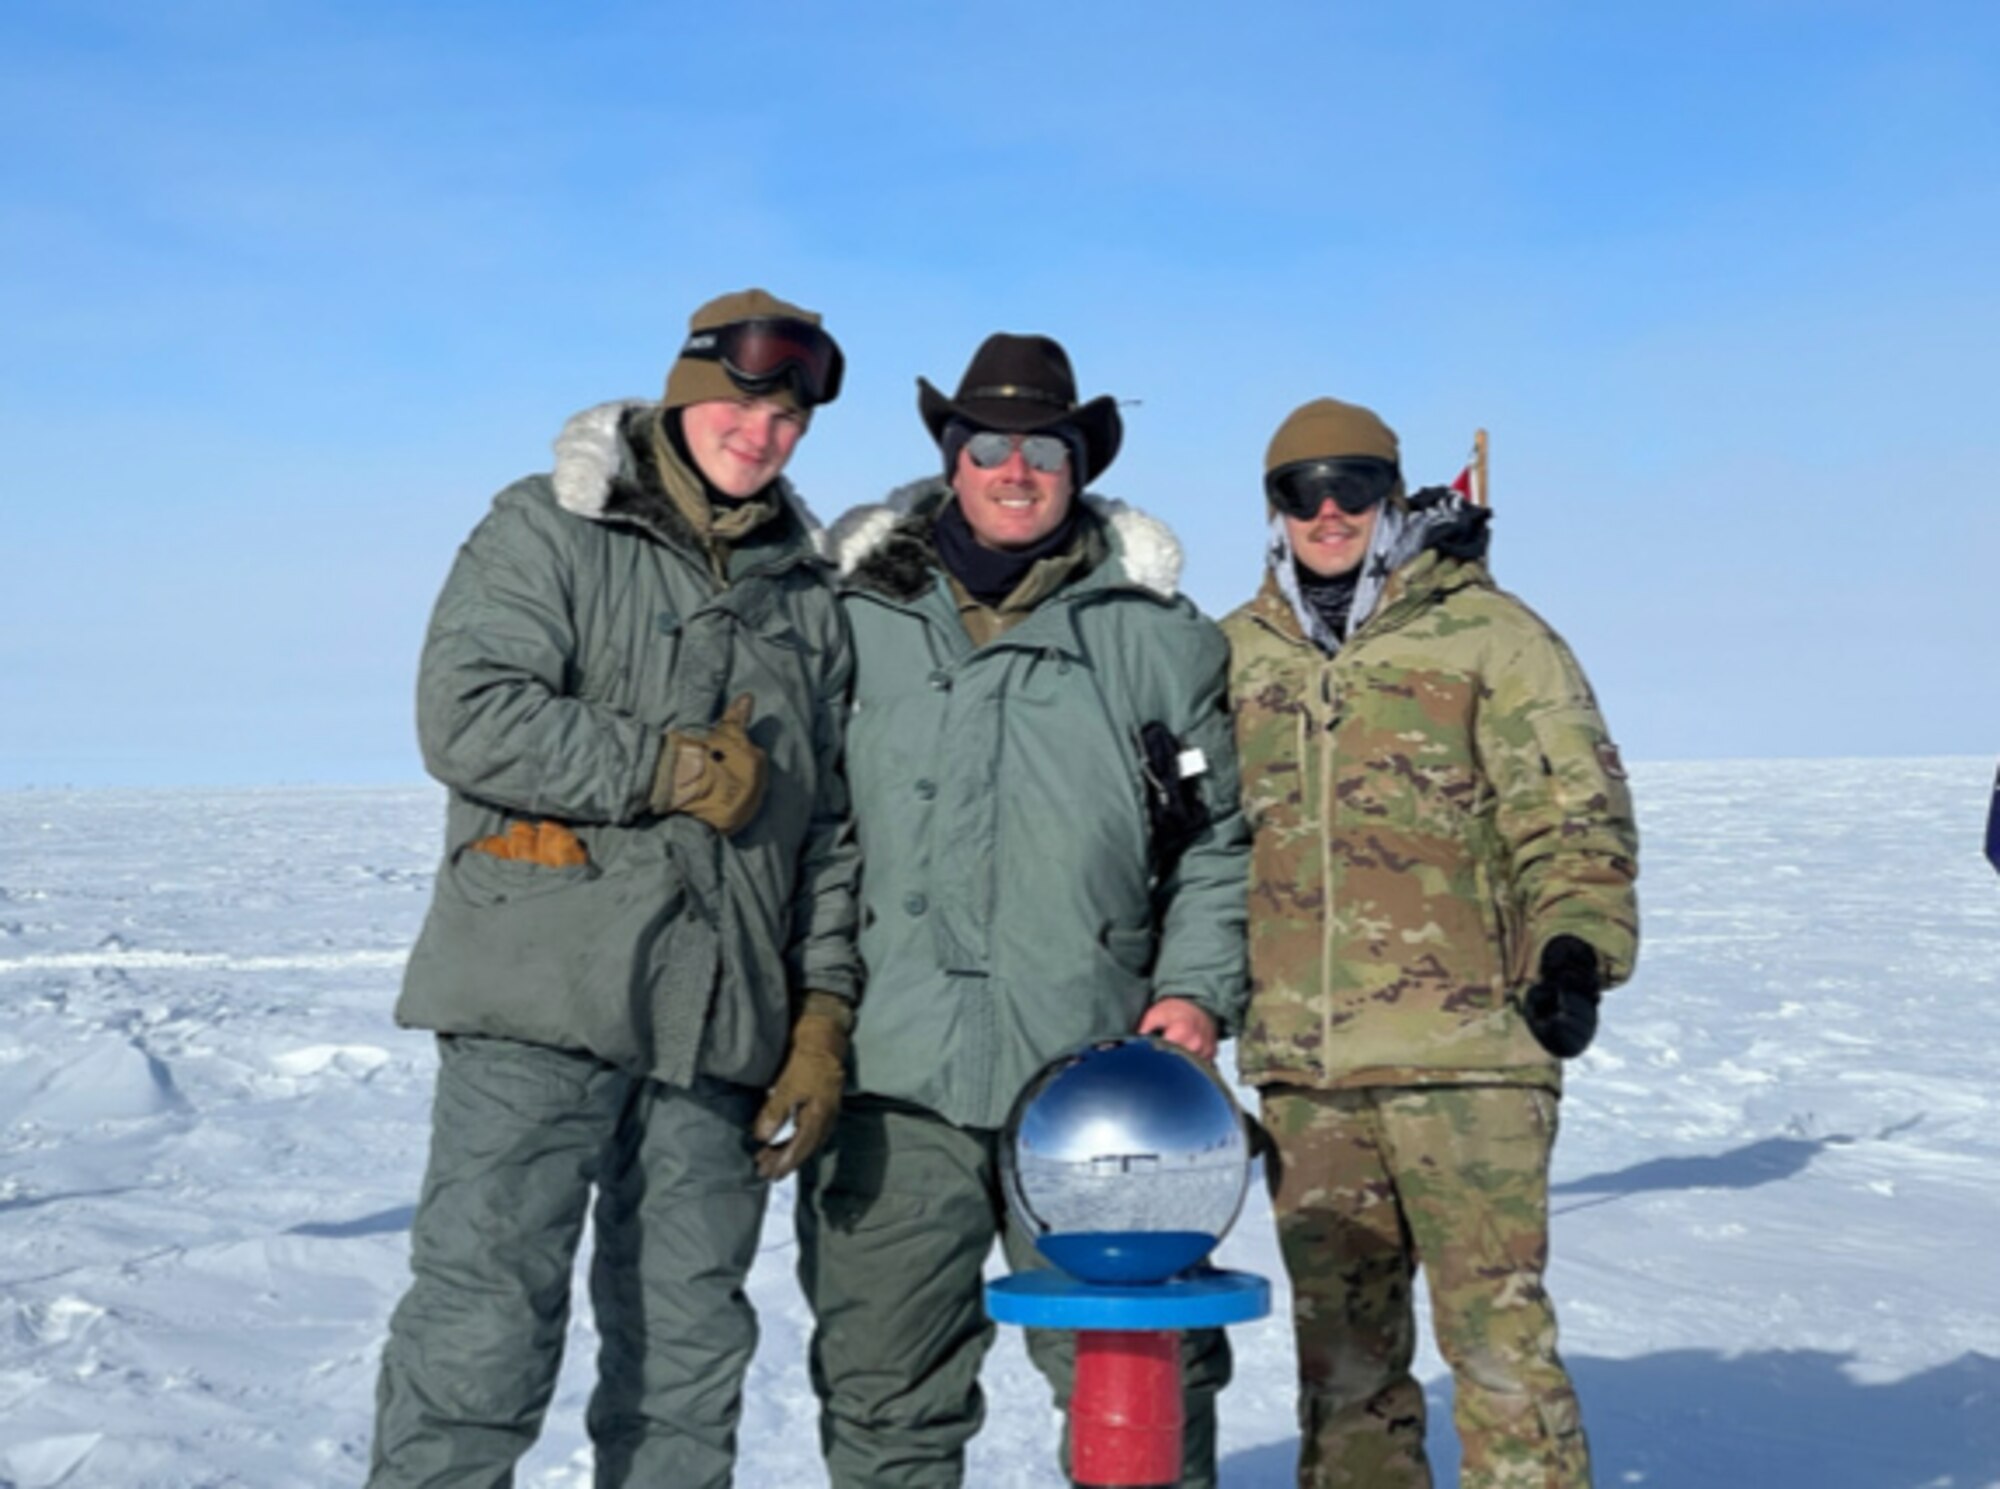 From left, Staff Sgt. Grant Santese, Tech Sgt. Daniel Craig and Staff Sgt. Jonathan Hooker worked tirelessly for two days in extreme weather at the South Pole to get an LC-130 Skibird airborne after a mechanical malfunction at the end of November 2022.